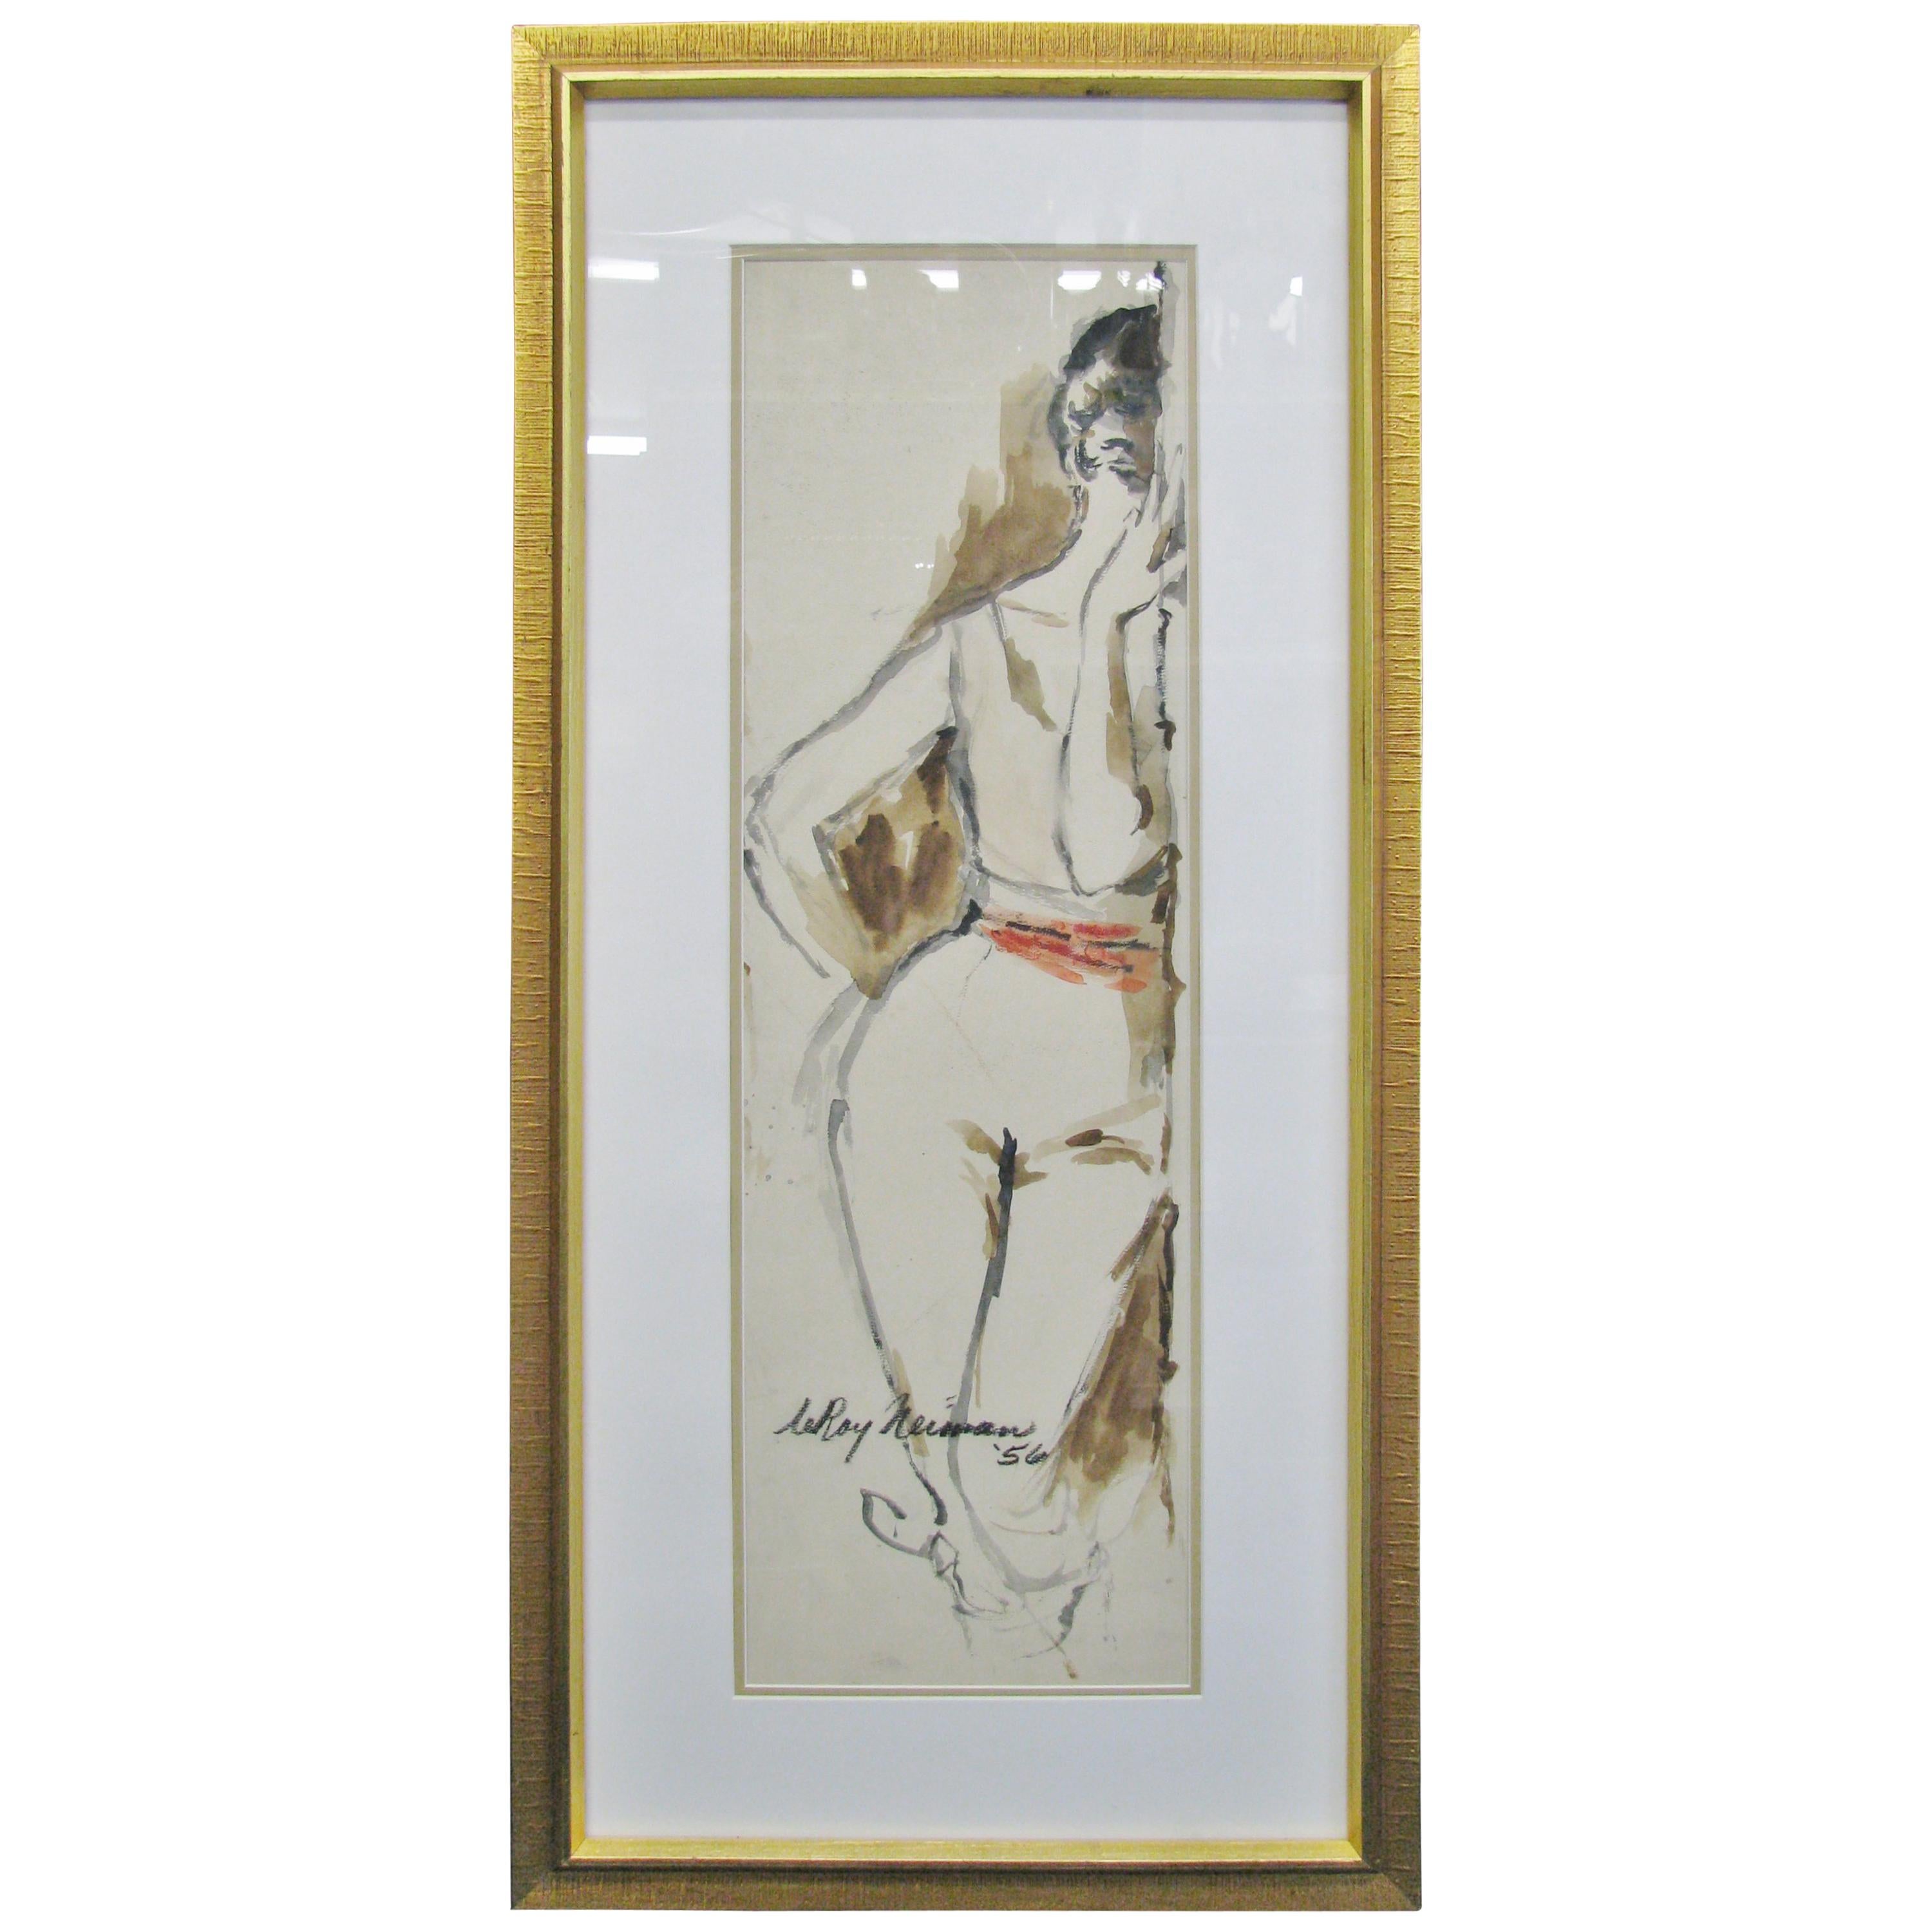 Striking 1950s Watercolor of a Woman by Leroy Neiman; Signed and Dated For Sale